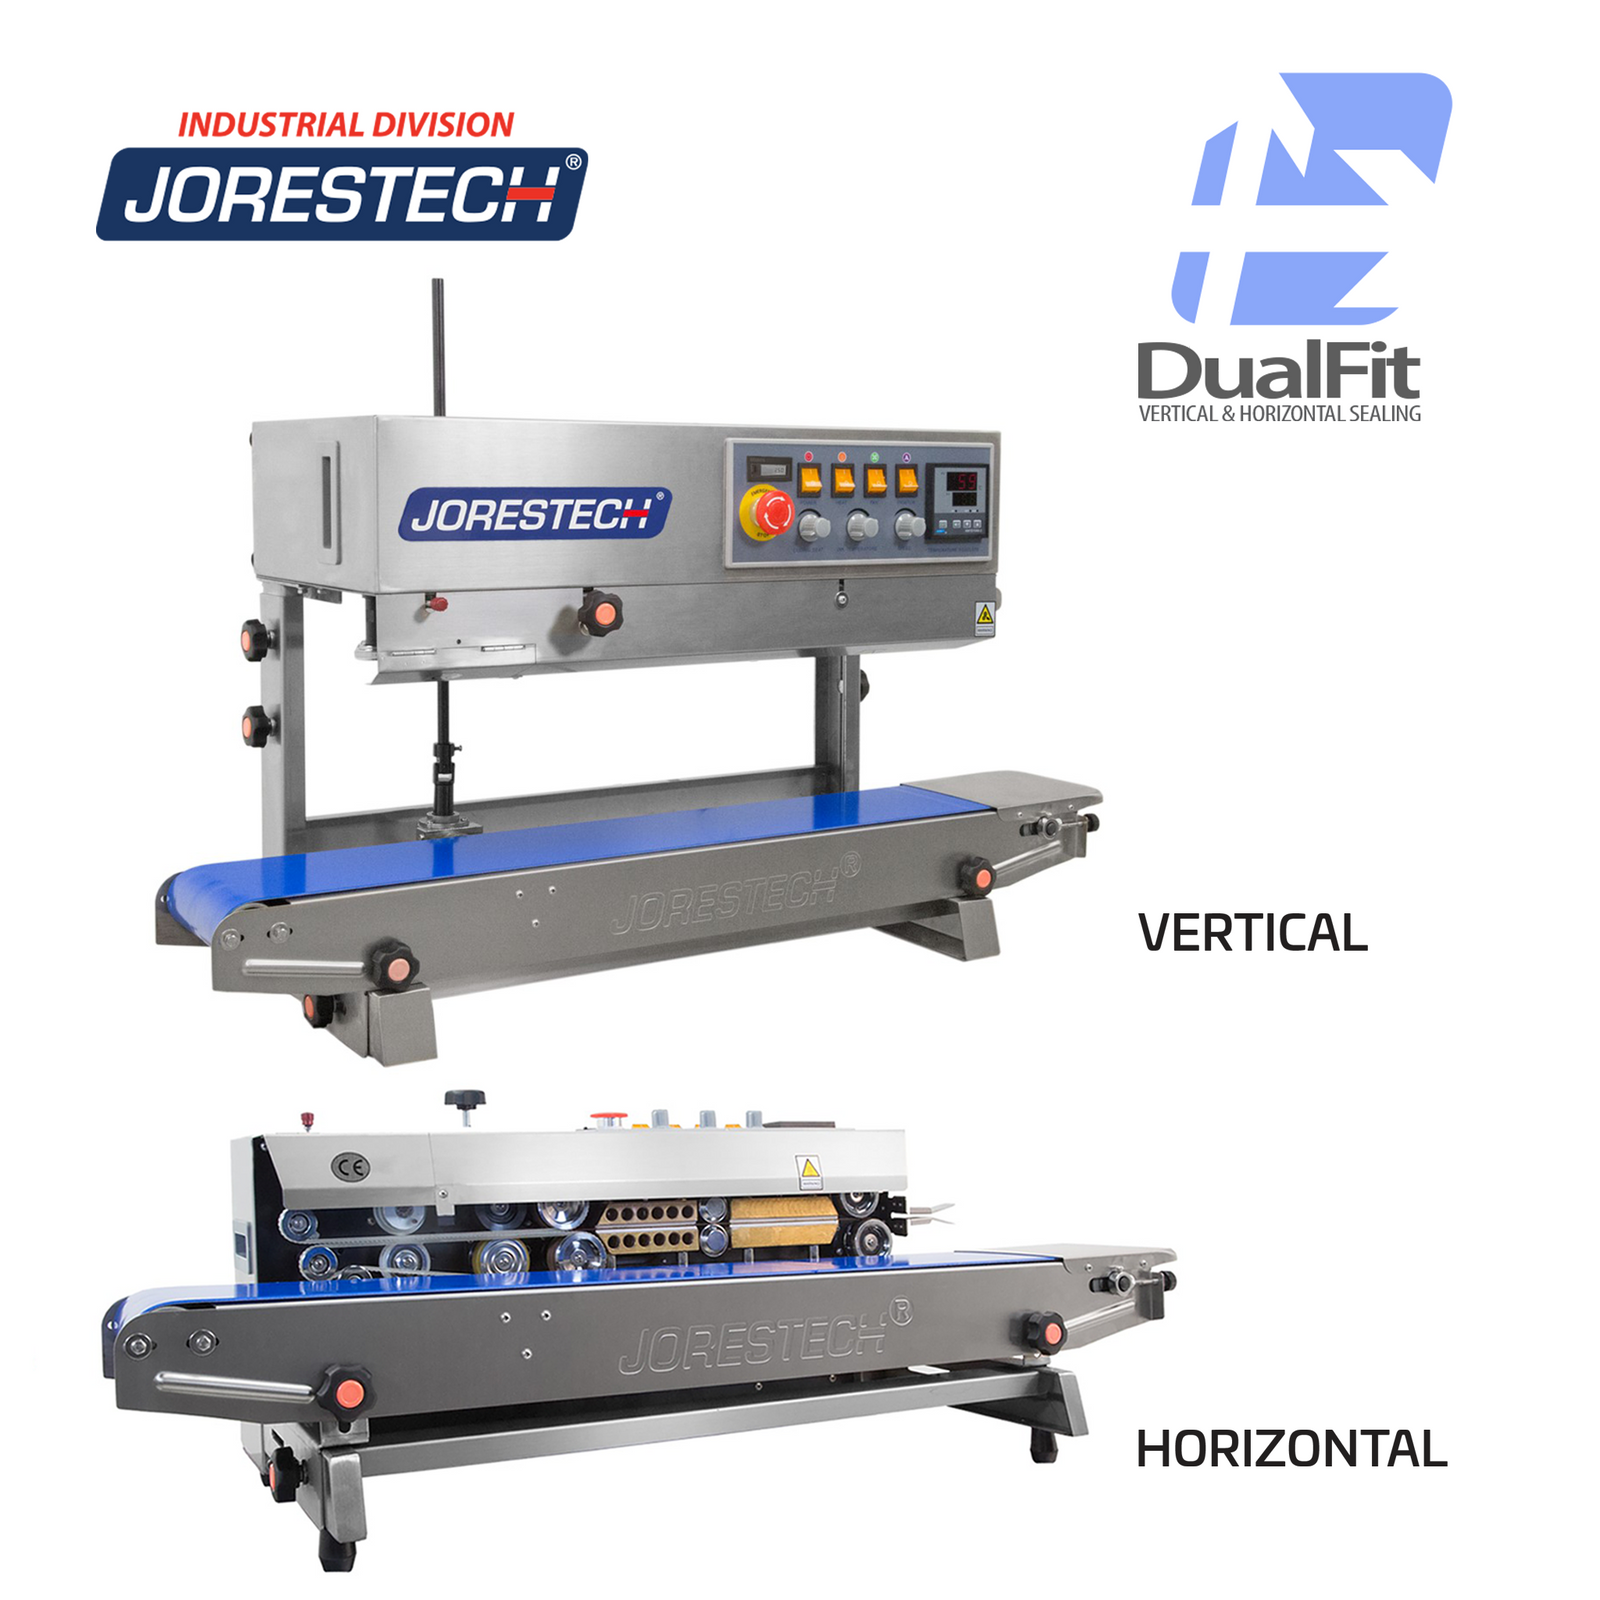 Showing the vertical and horizontal positioning of the  stainless steel JORESTECH continuous band sealer for 220V. Dual fit logo with arrows indicate that this table top bag sealer can be used for vertical and for horizontal applications. 